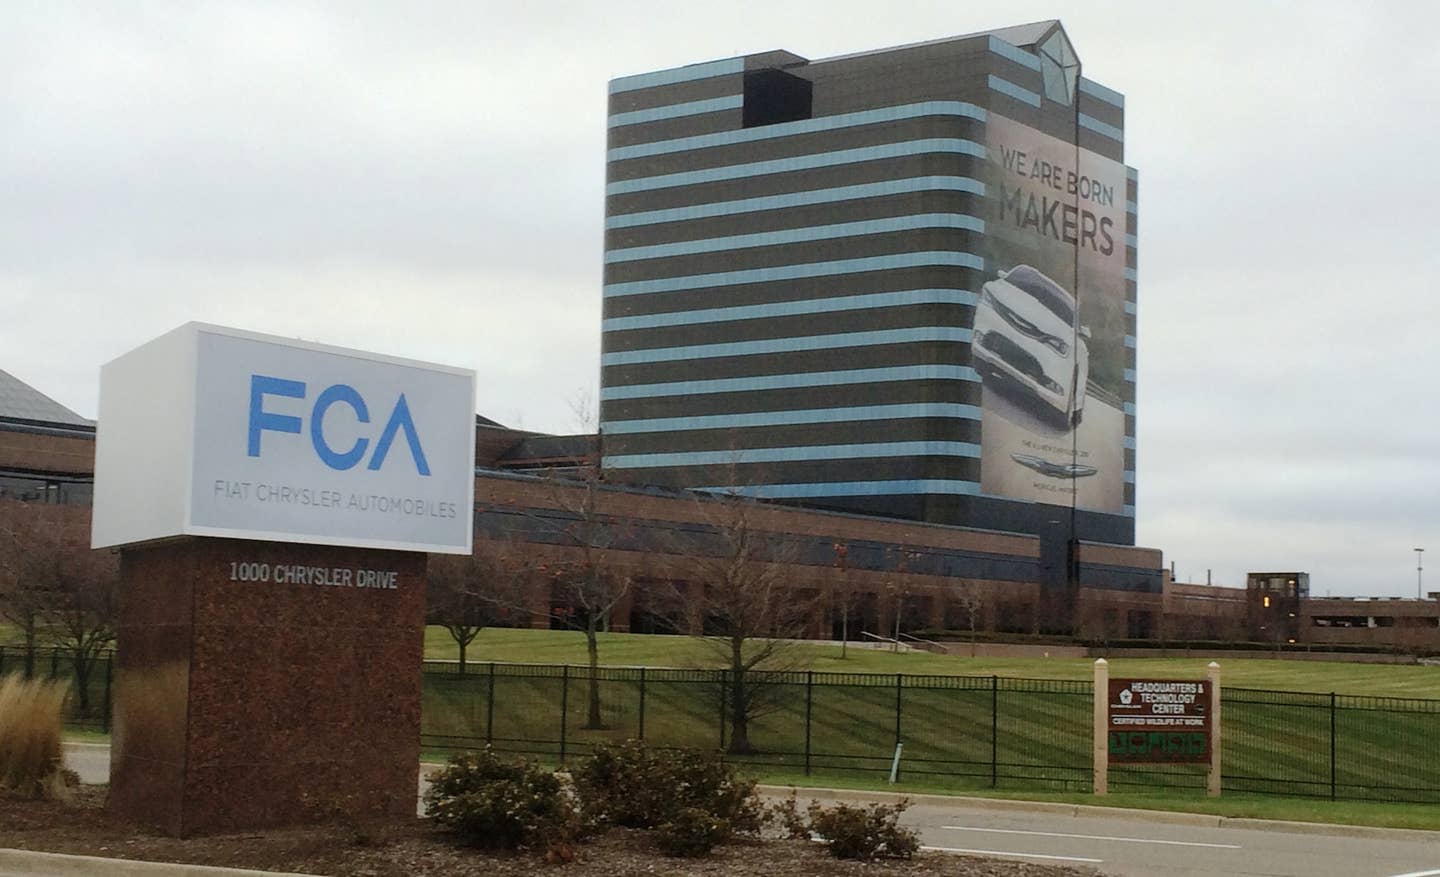 Does FCA Have A Secret Self-Driving Car Project?